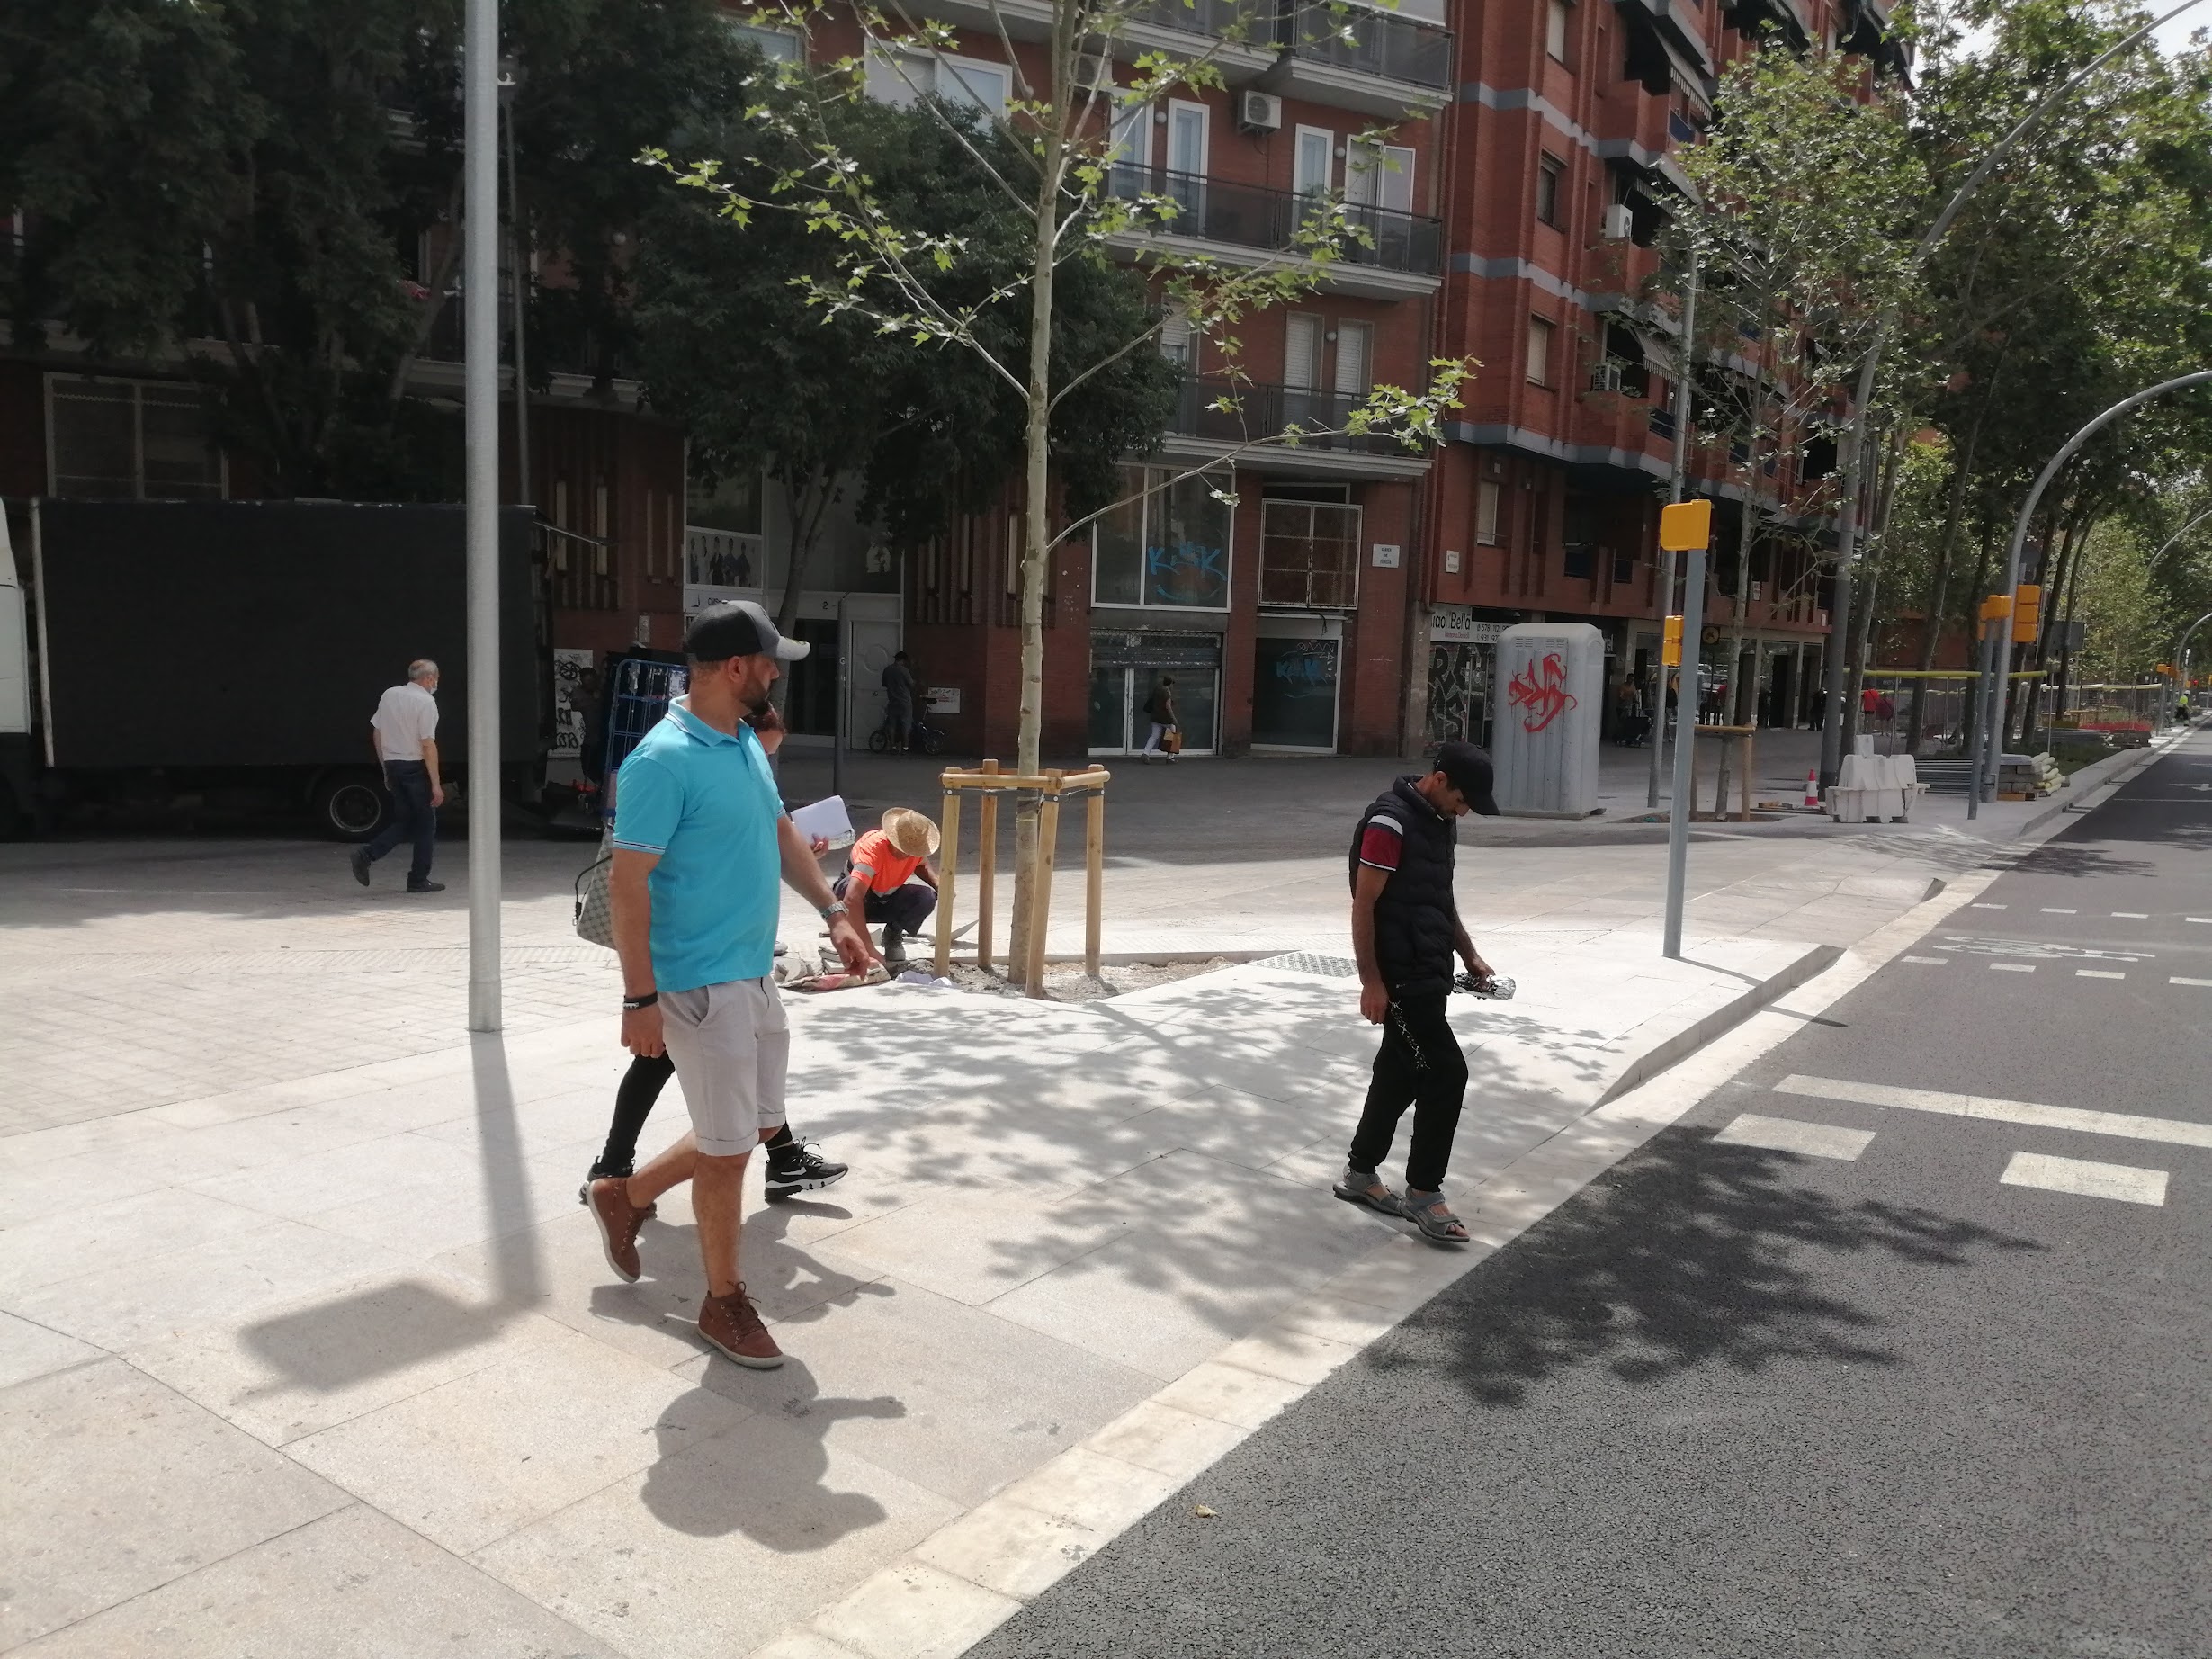 A photo of new pedestrian infrastructure in Barcelona, with three people walking on it.